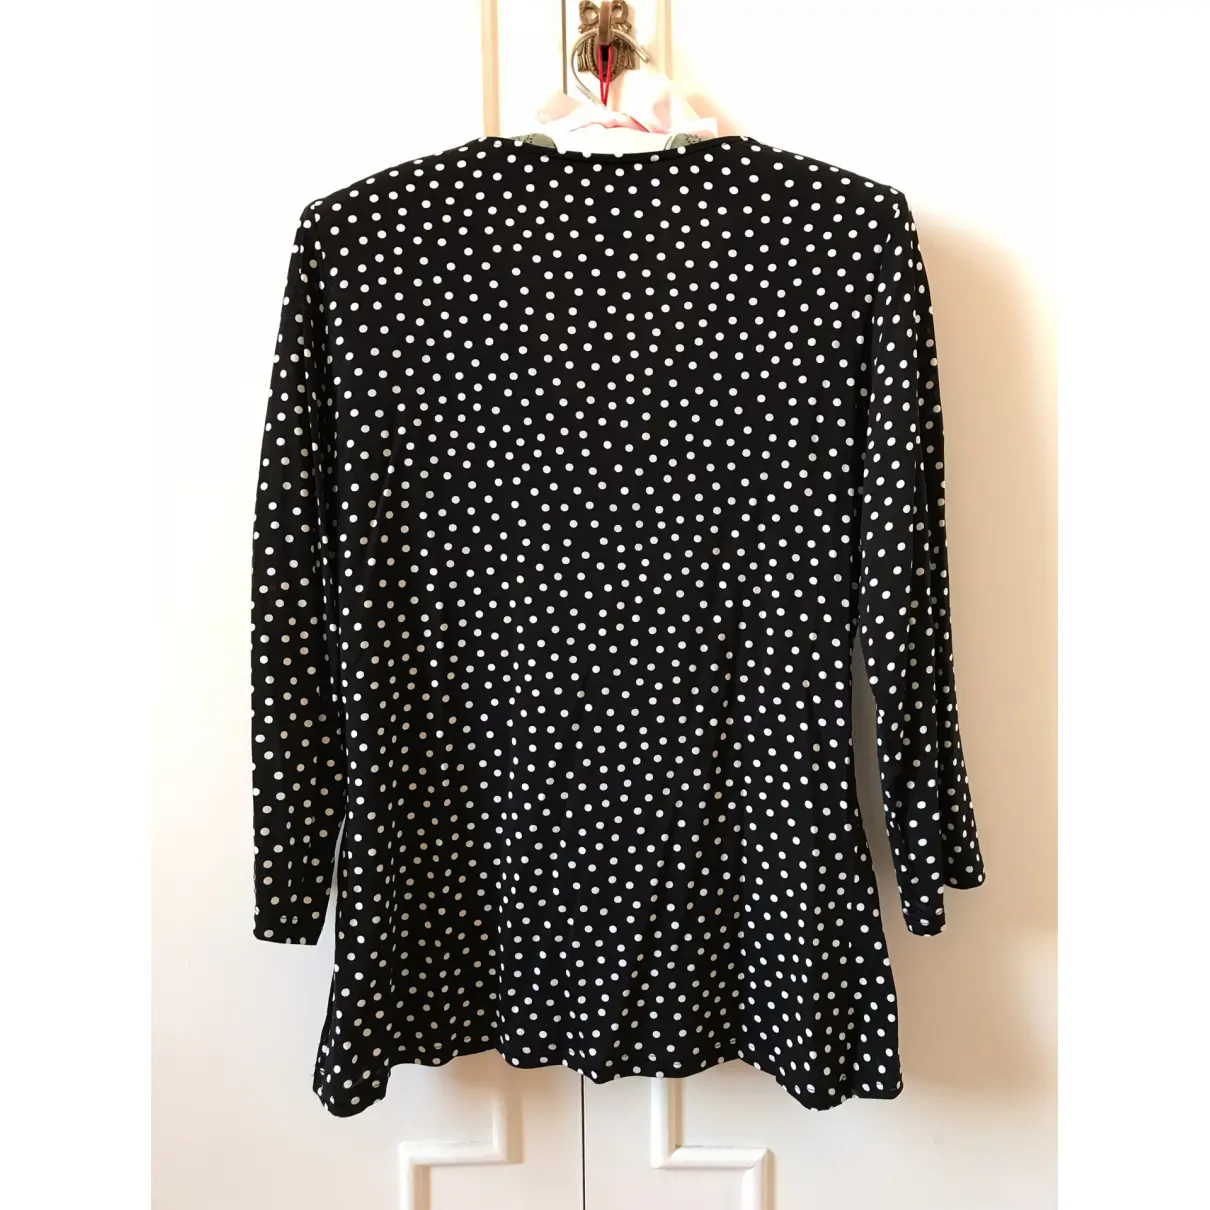 Buy WEILL Blouse online